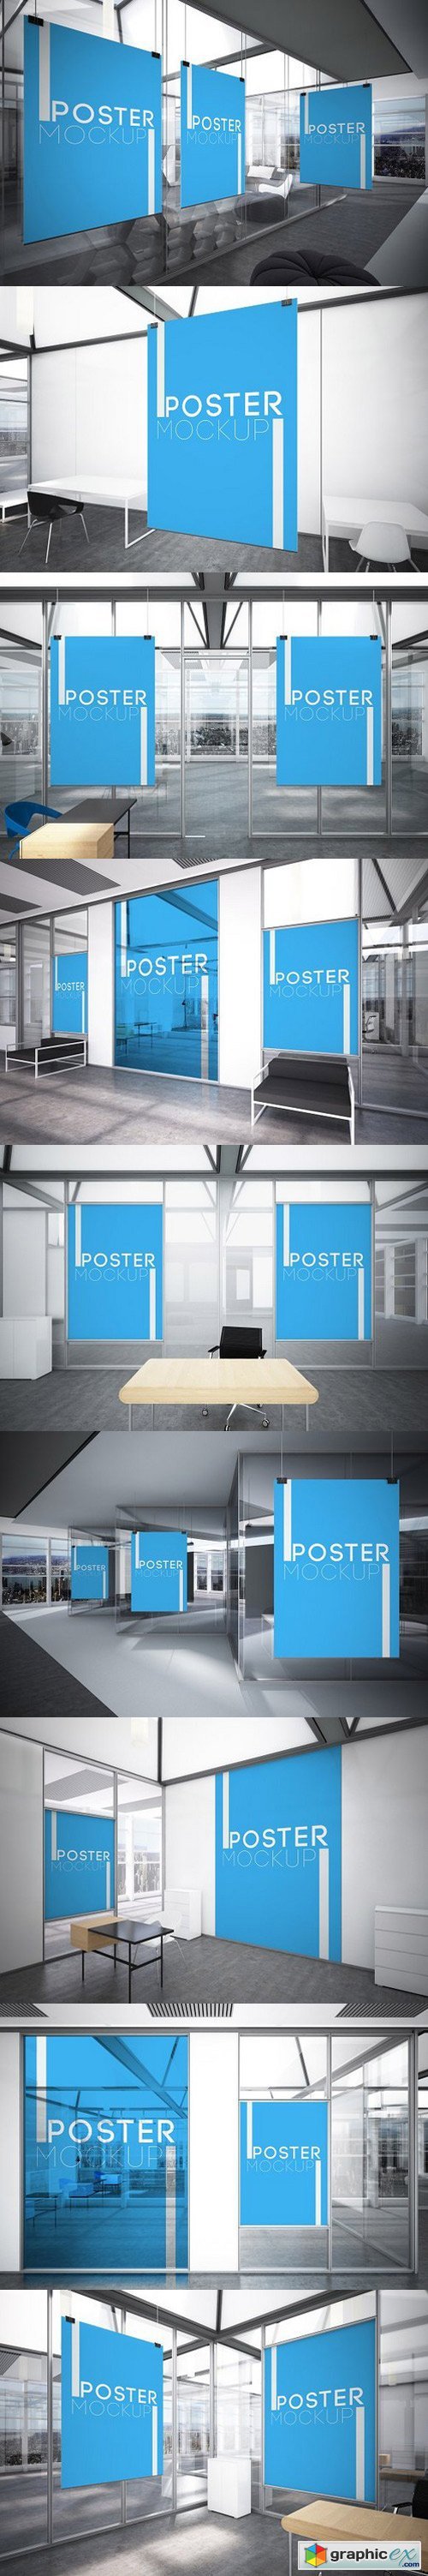 Office Posters Mockups